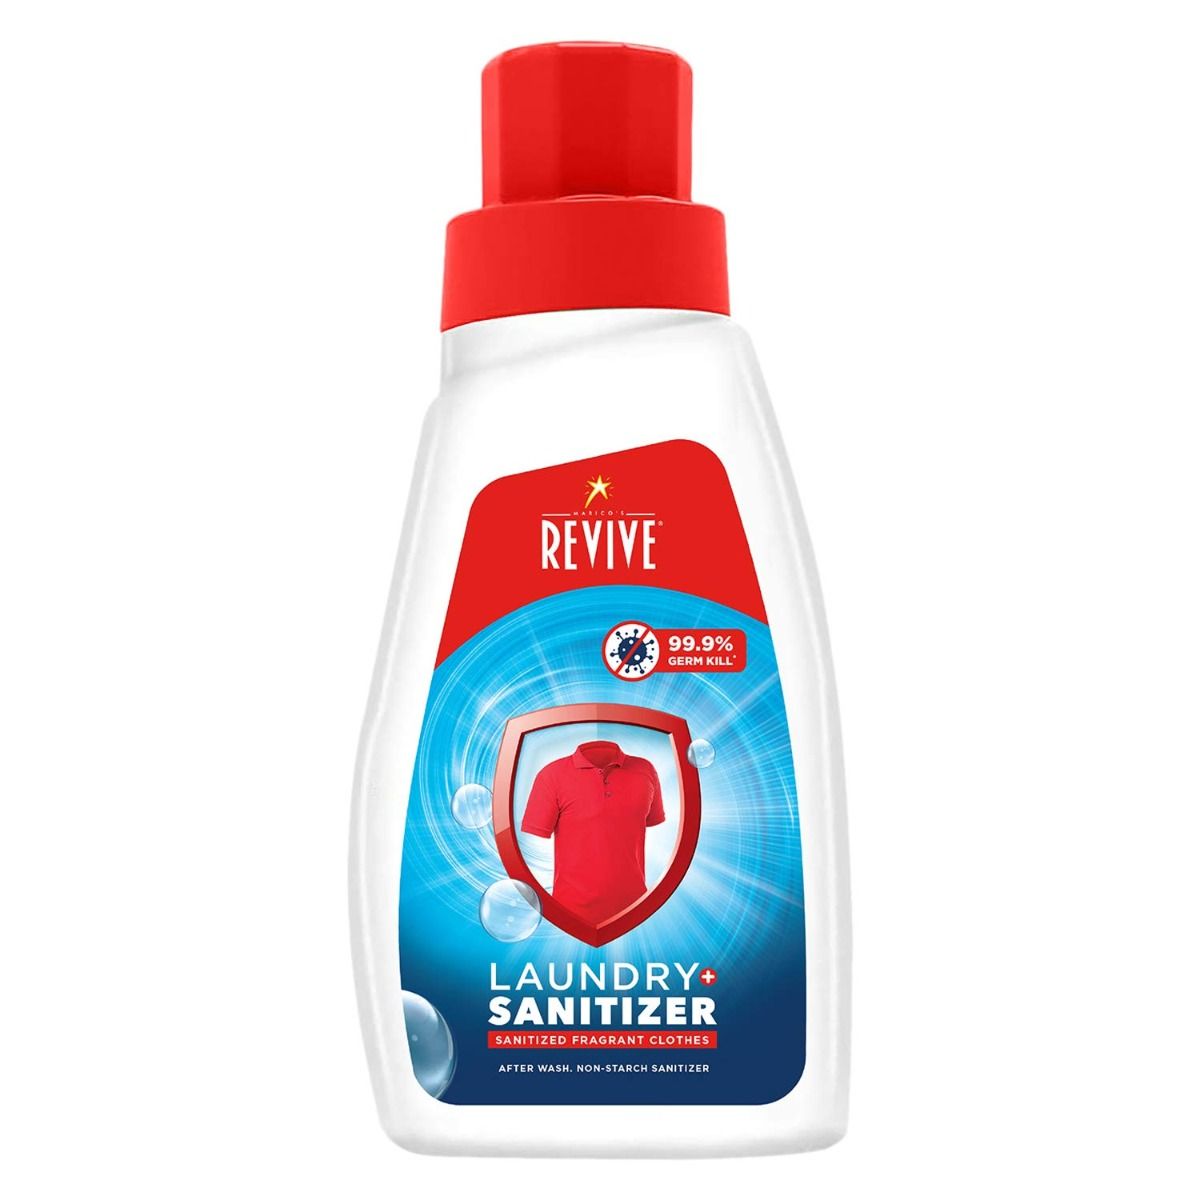 Revive Laundry Sanitizer, 200 ml, Pack of 1 